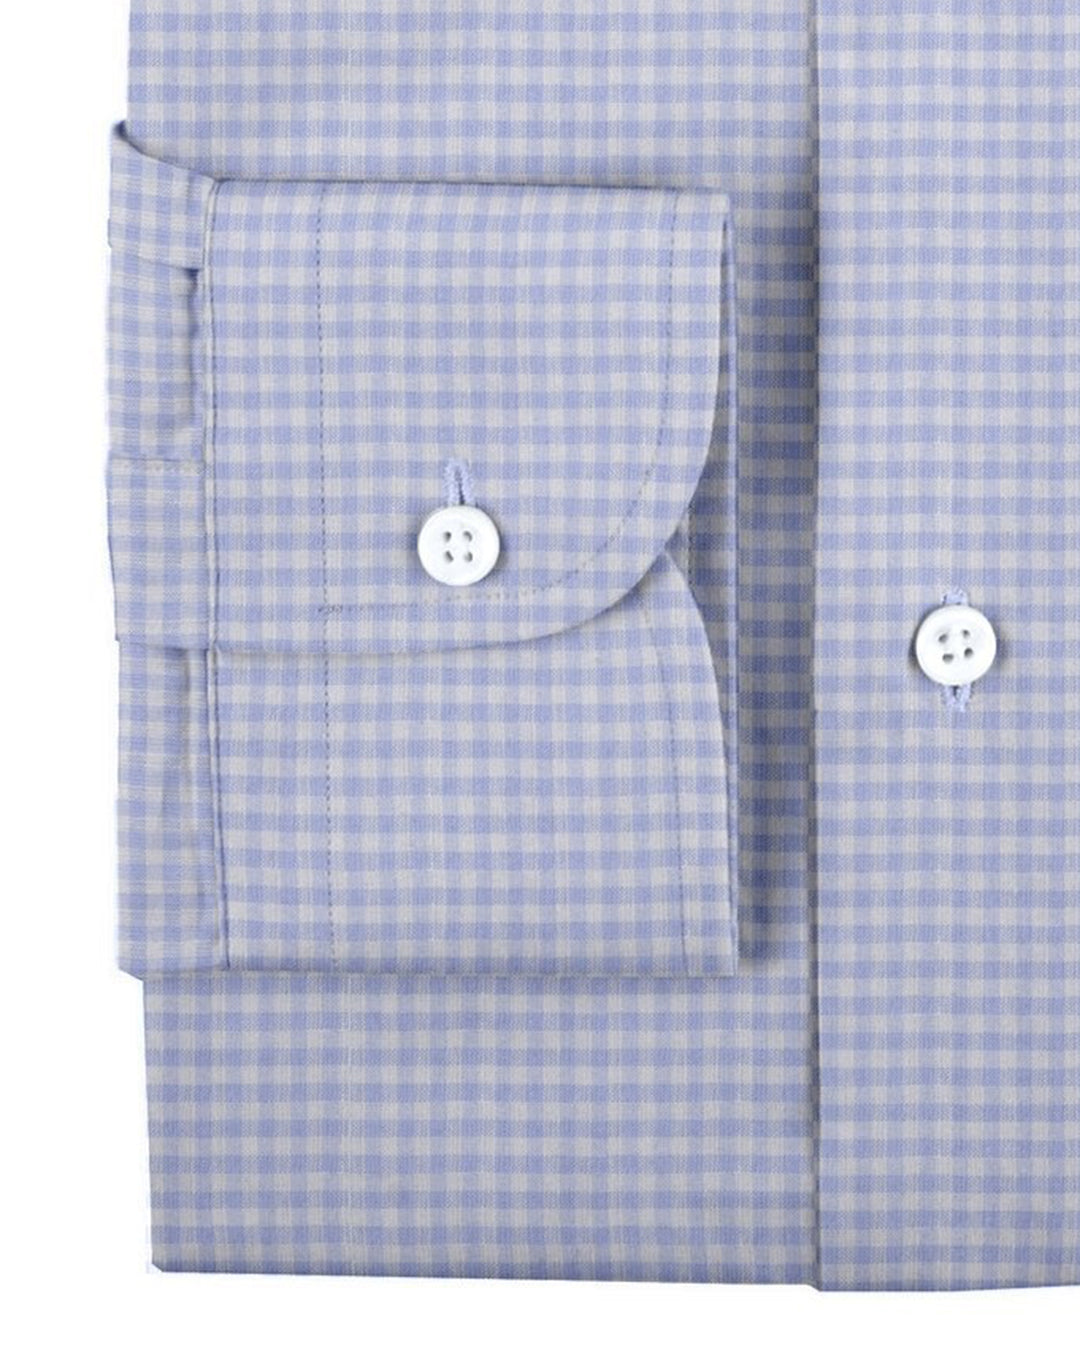 Cuff of the custom linen shirt for men in light blue with blue gingham checks by Luxire Clothing